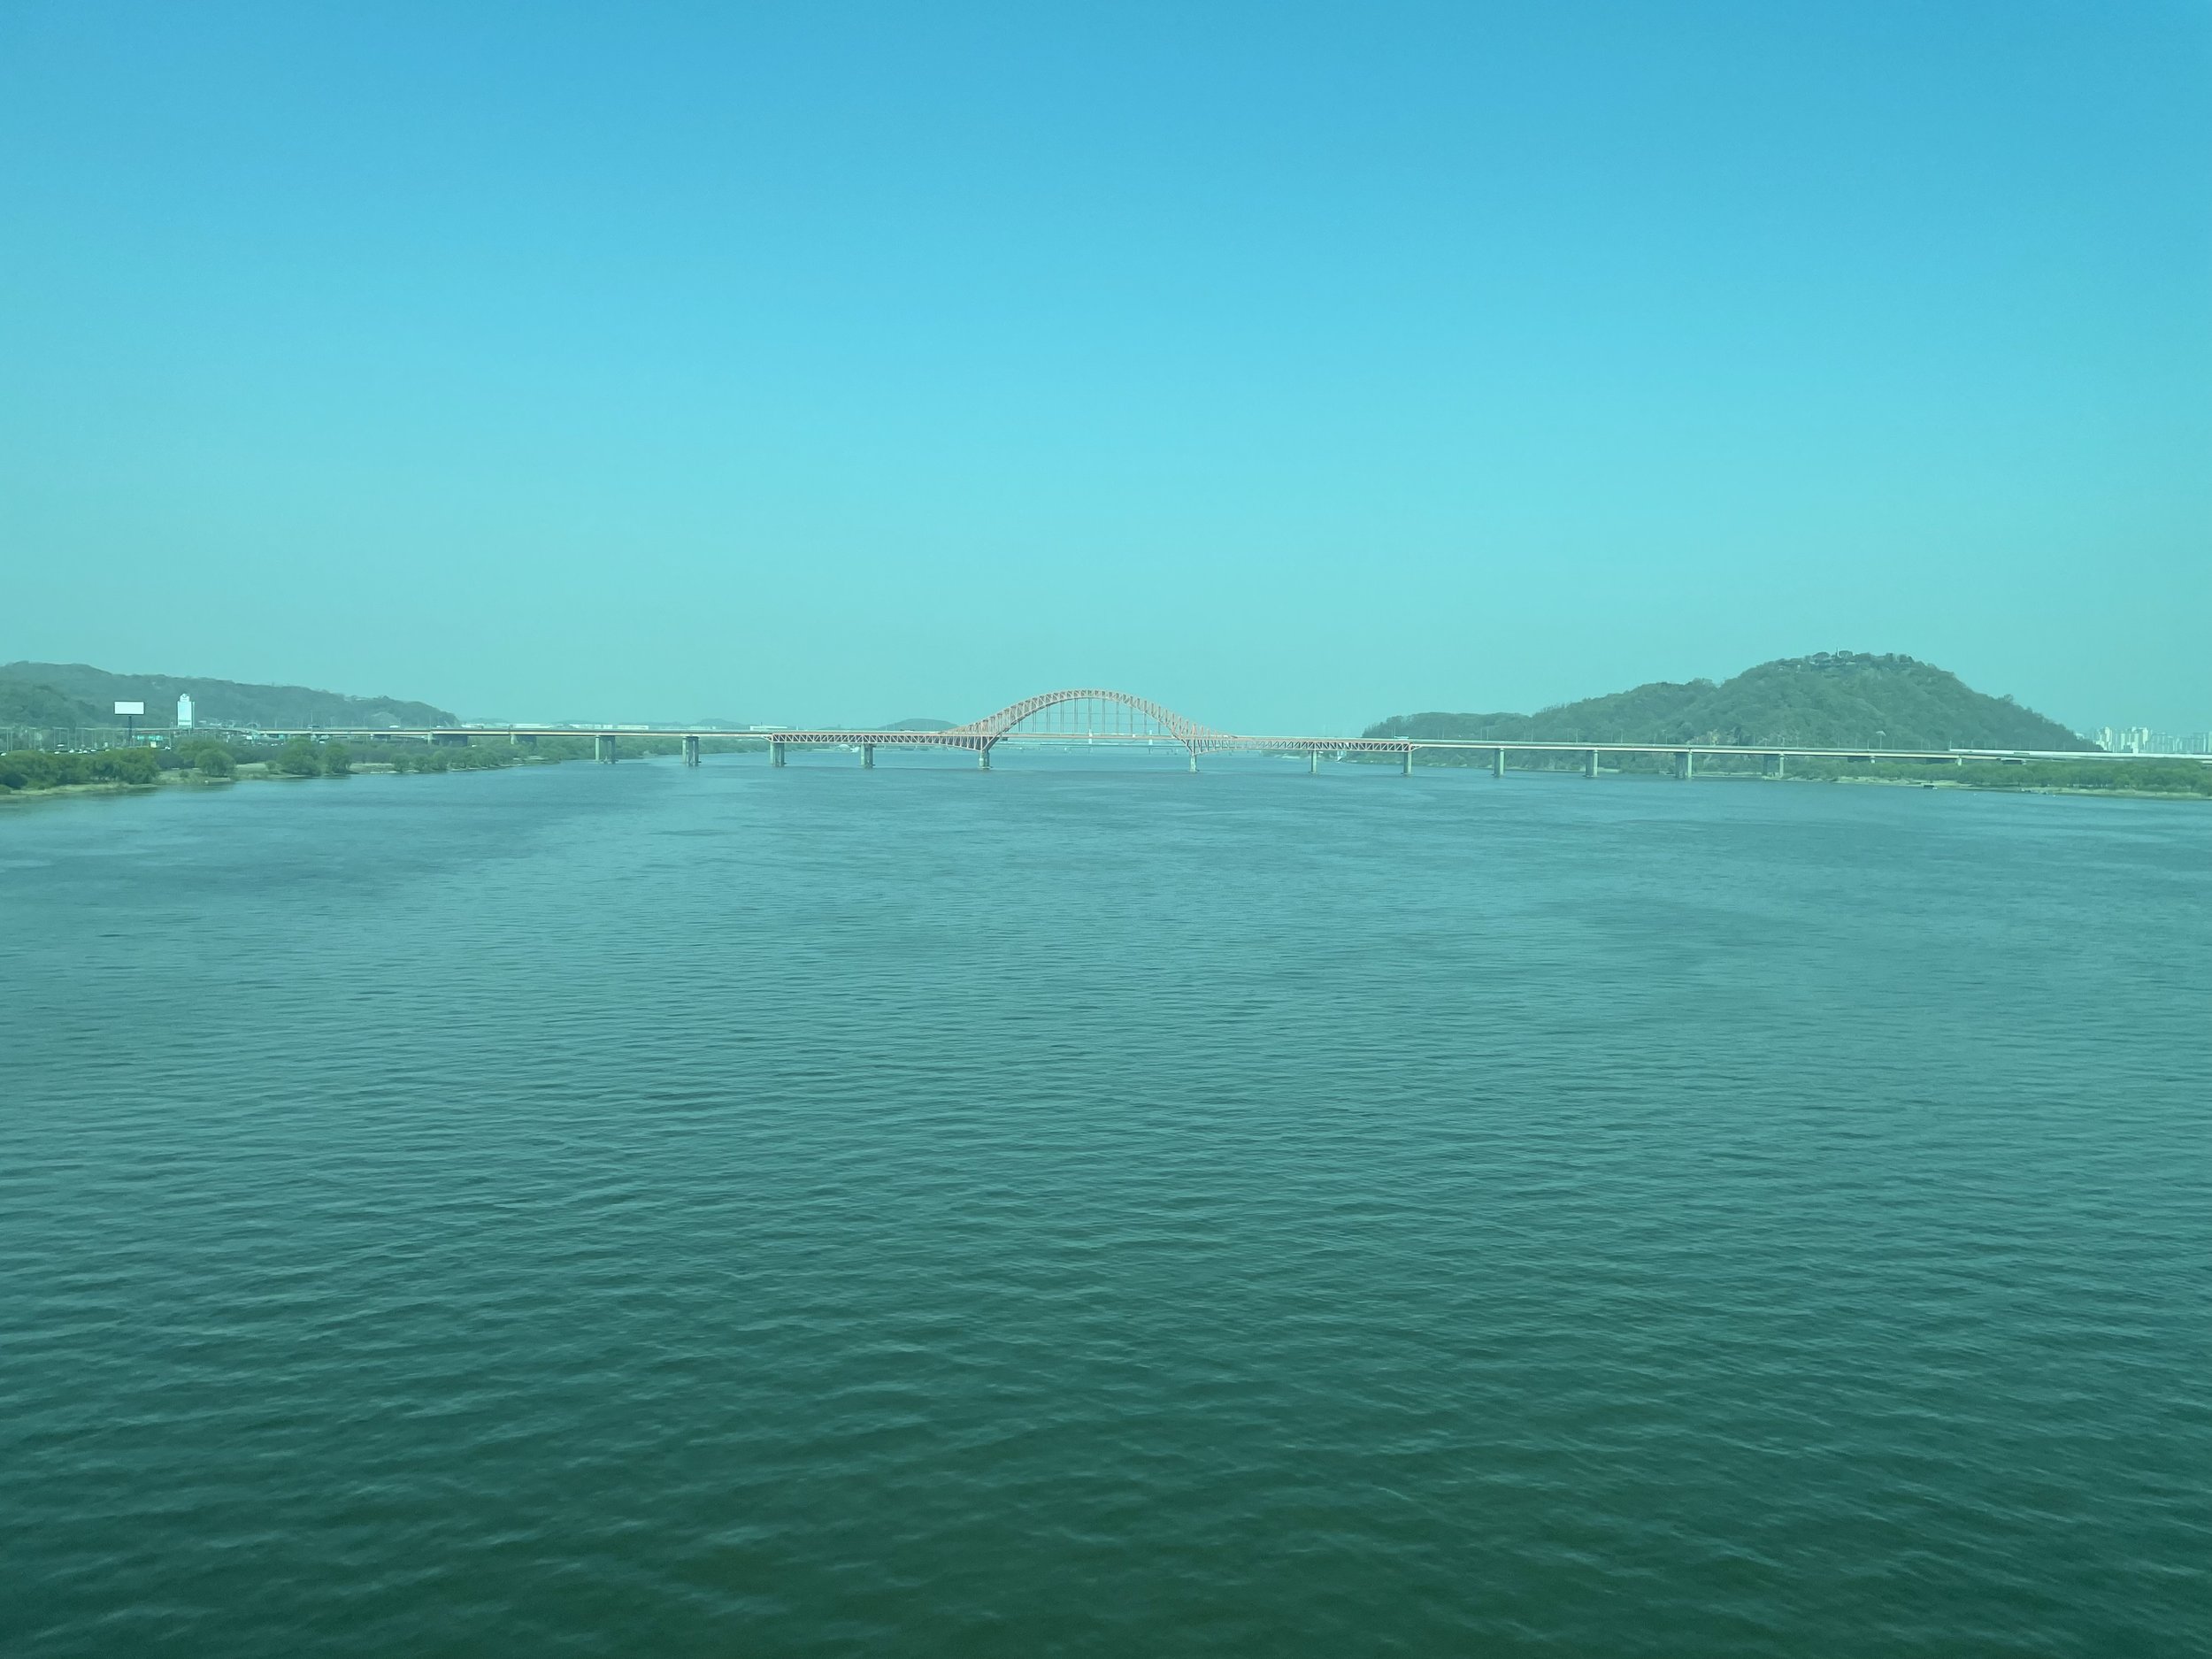 View from the AREX of the Han River